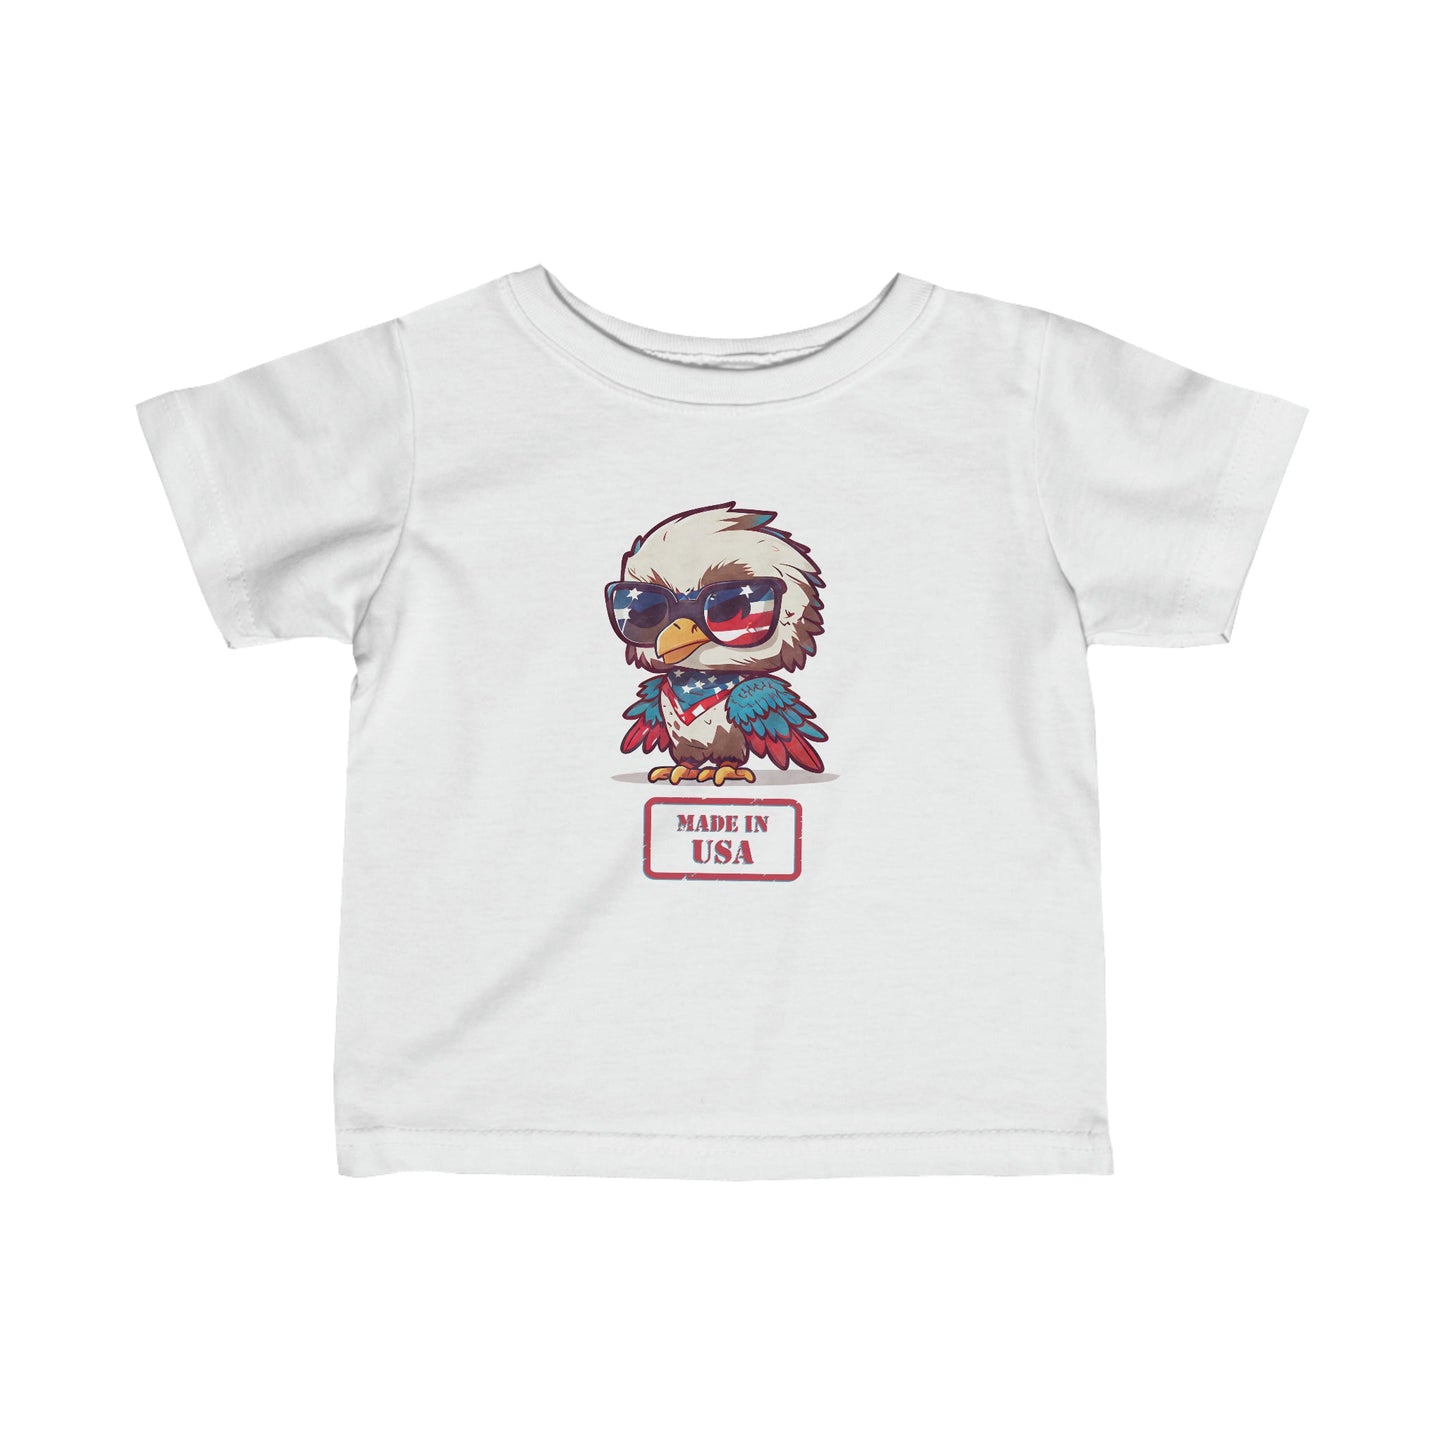 All American Eaglet Infant Fine Jersey Tee - ZumBuys